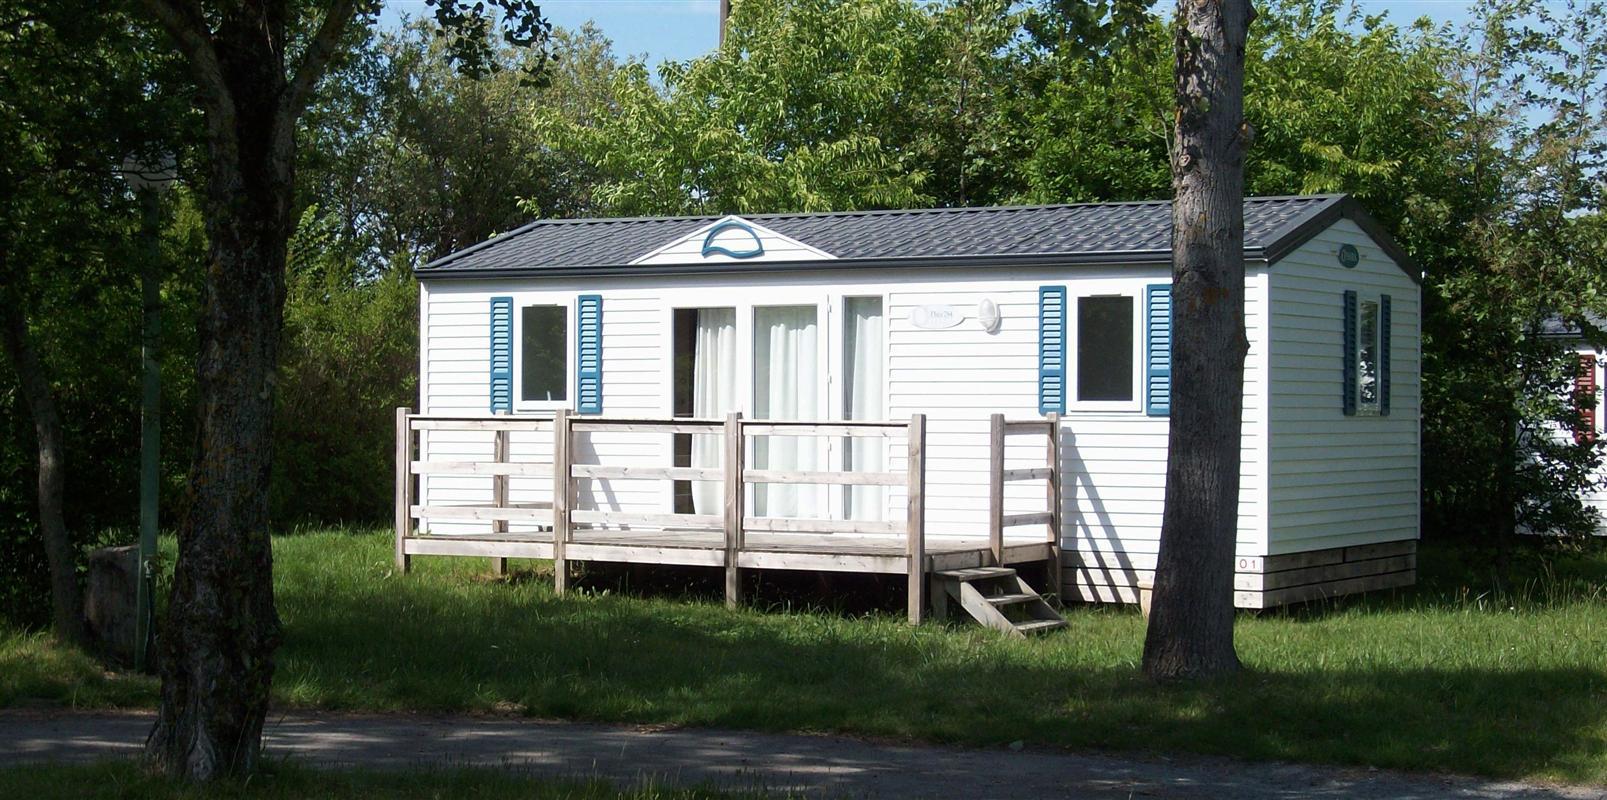 Location - Mobil-Home O'phea 784 29 M² 2 Chambres / Terrasse - Camping de Ker-Lay